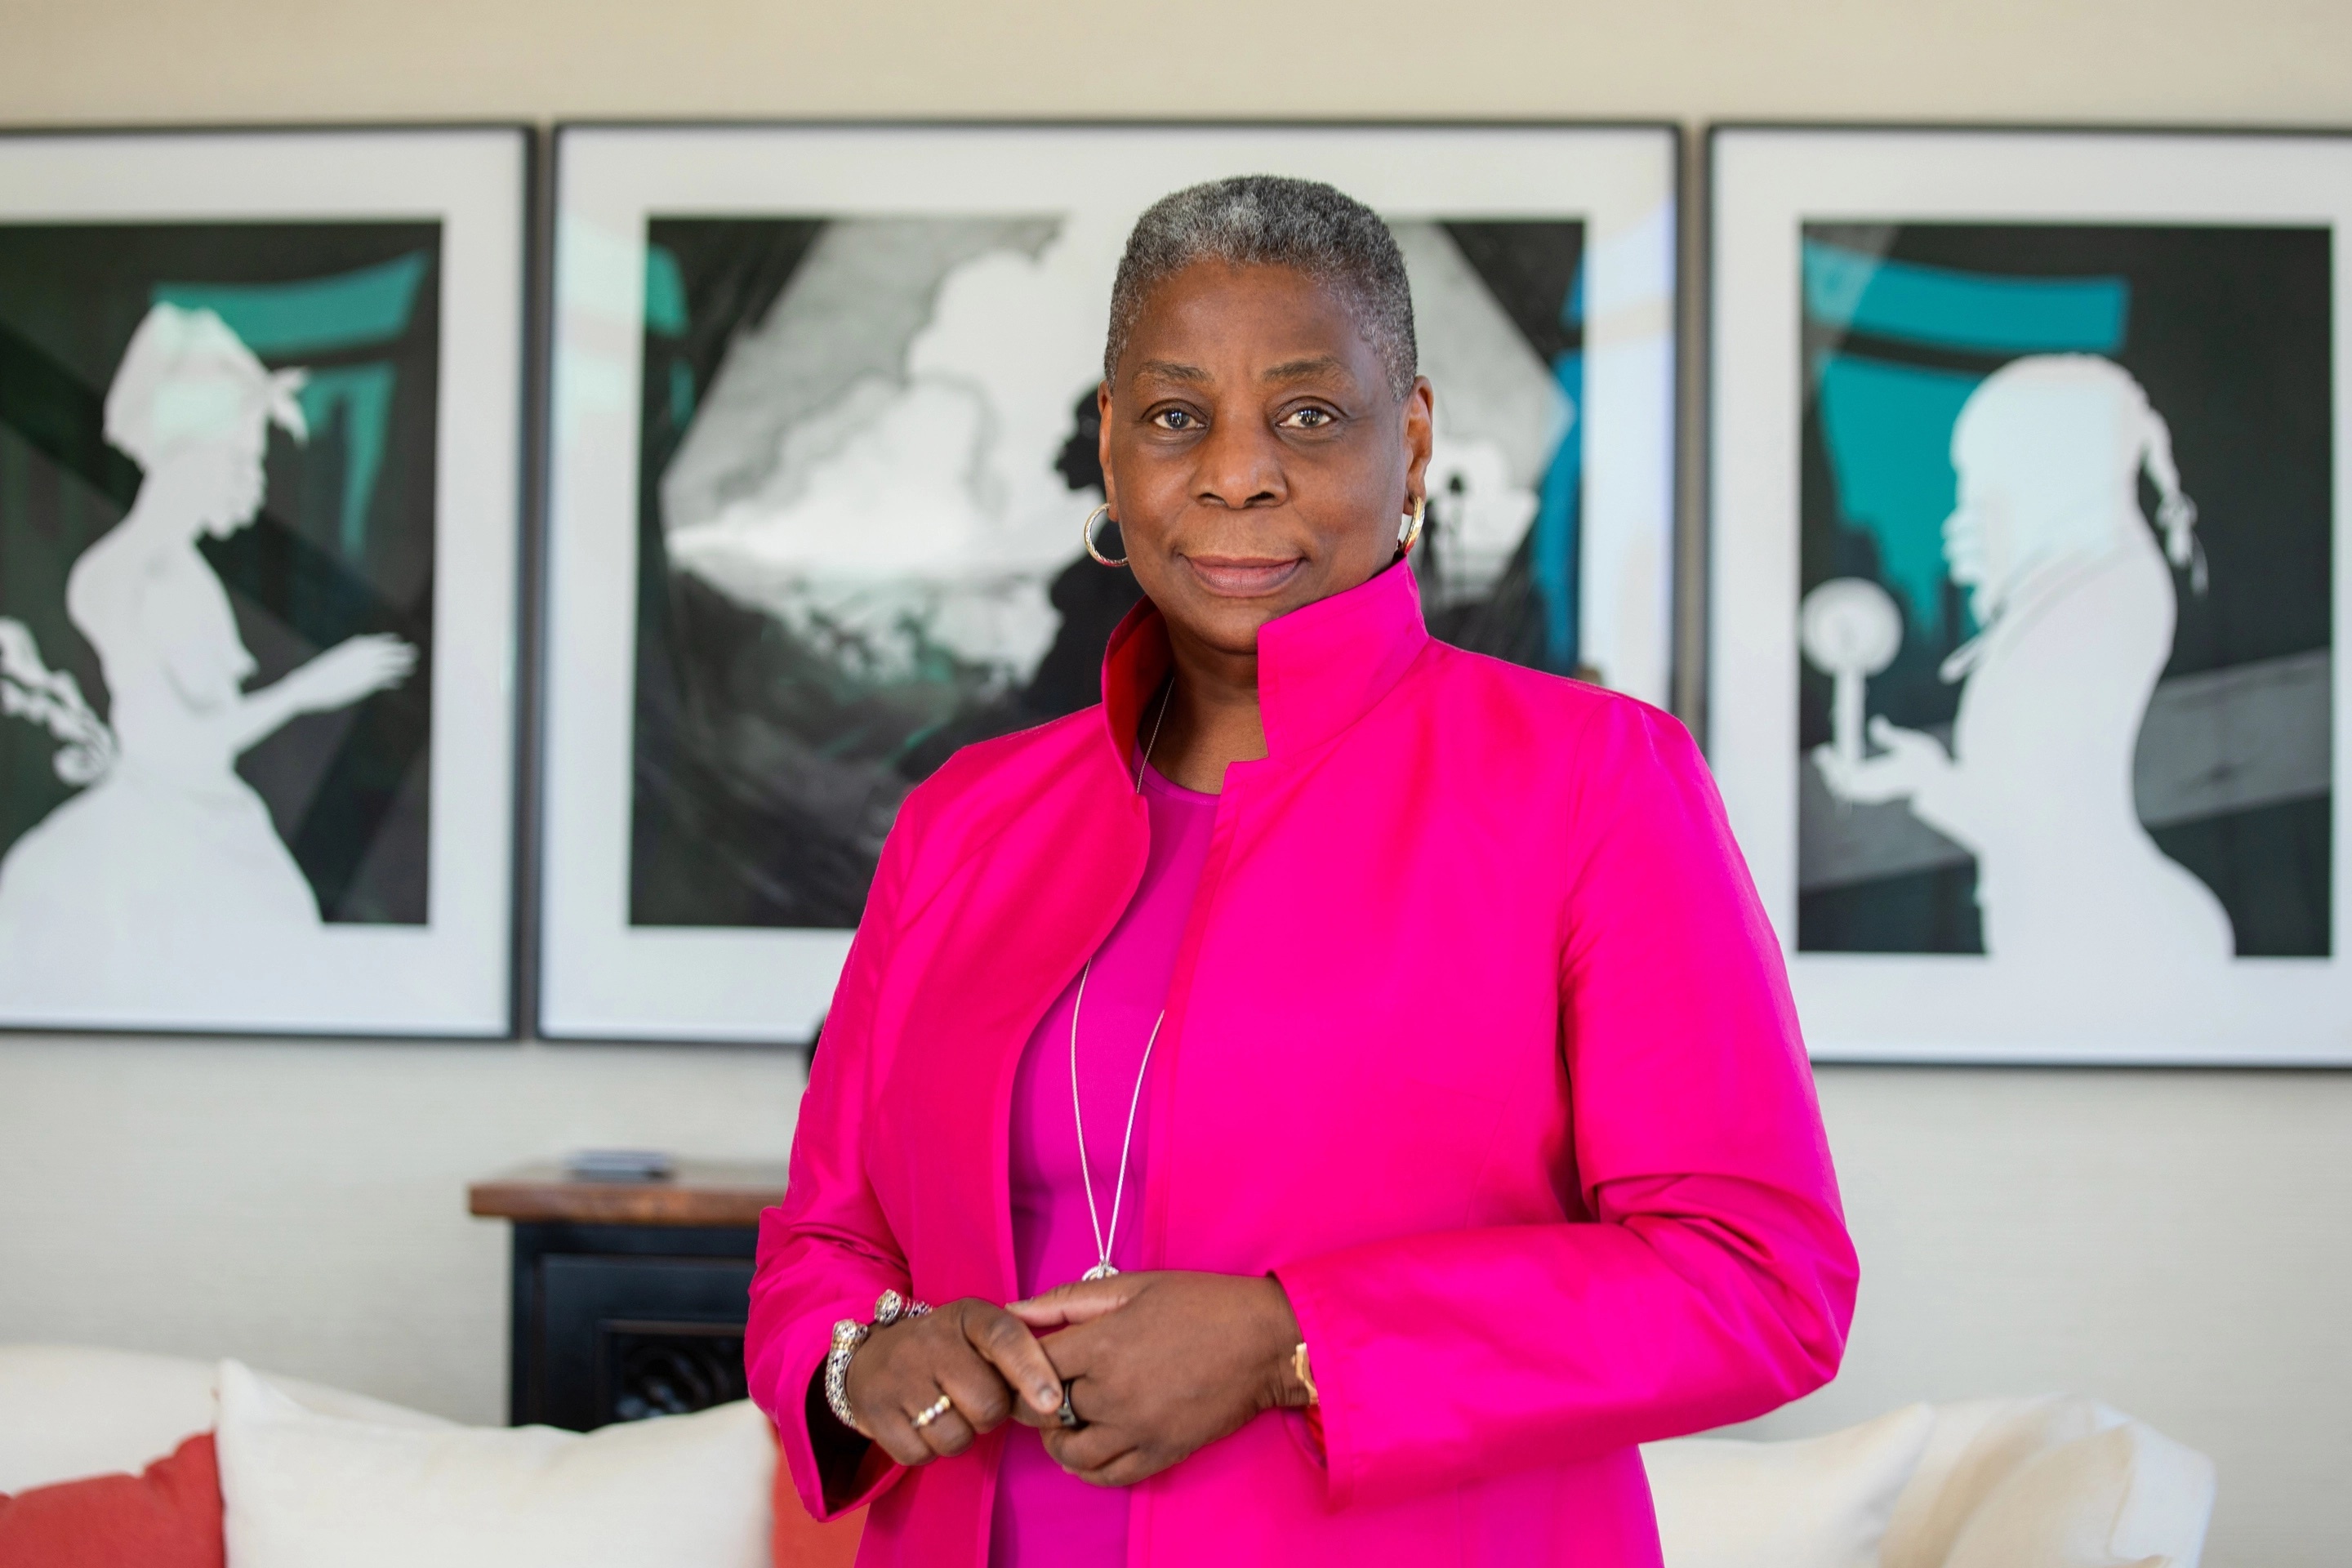 Ursula Burns, The First Black Woman CEO In The Fortune 500, Details What It's Like To Serve On Various Boards